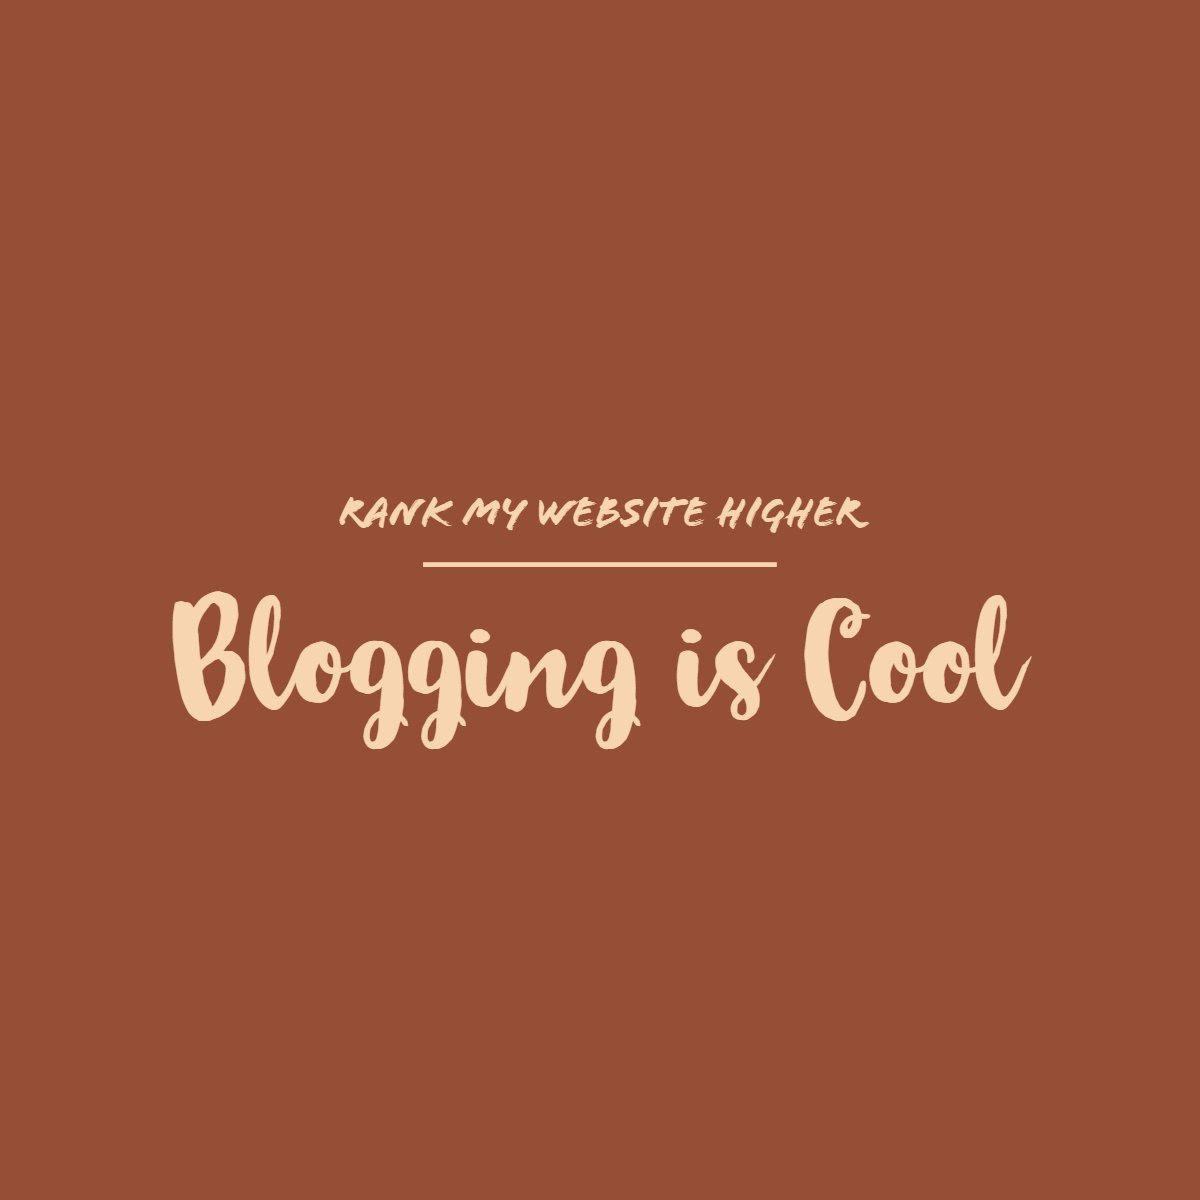 bloggingiscool.com 50 of the largest websites to serve as inspiration